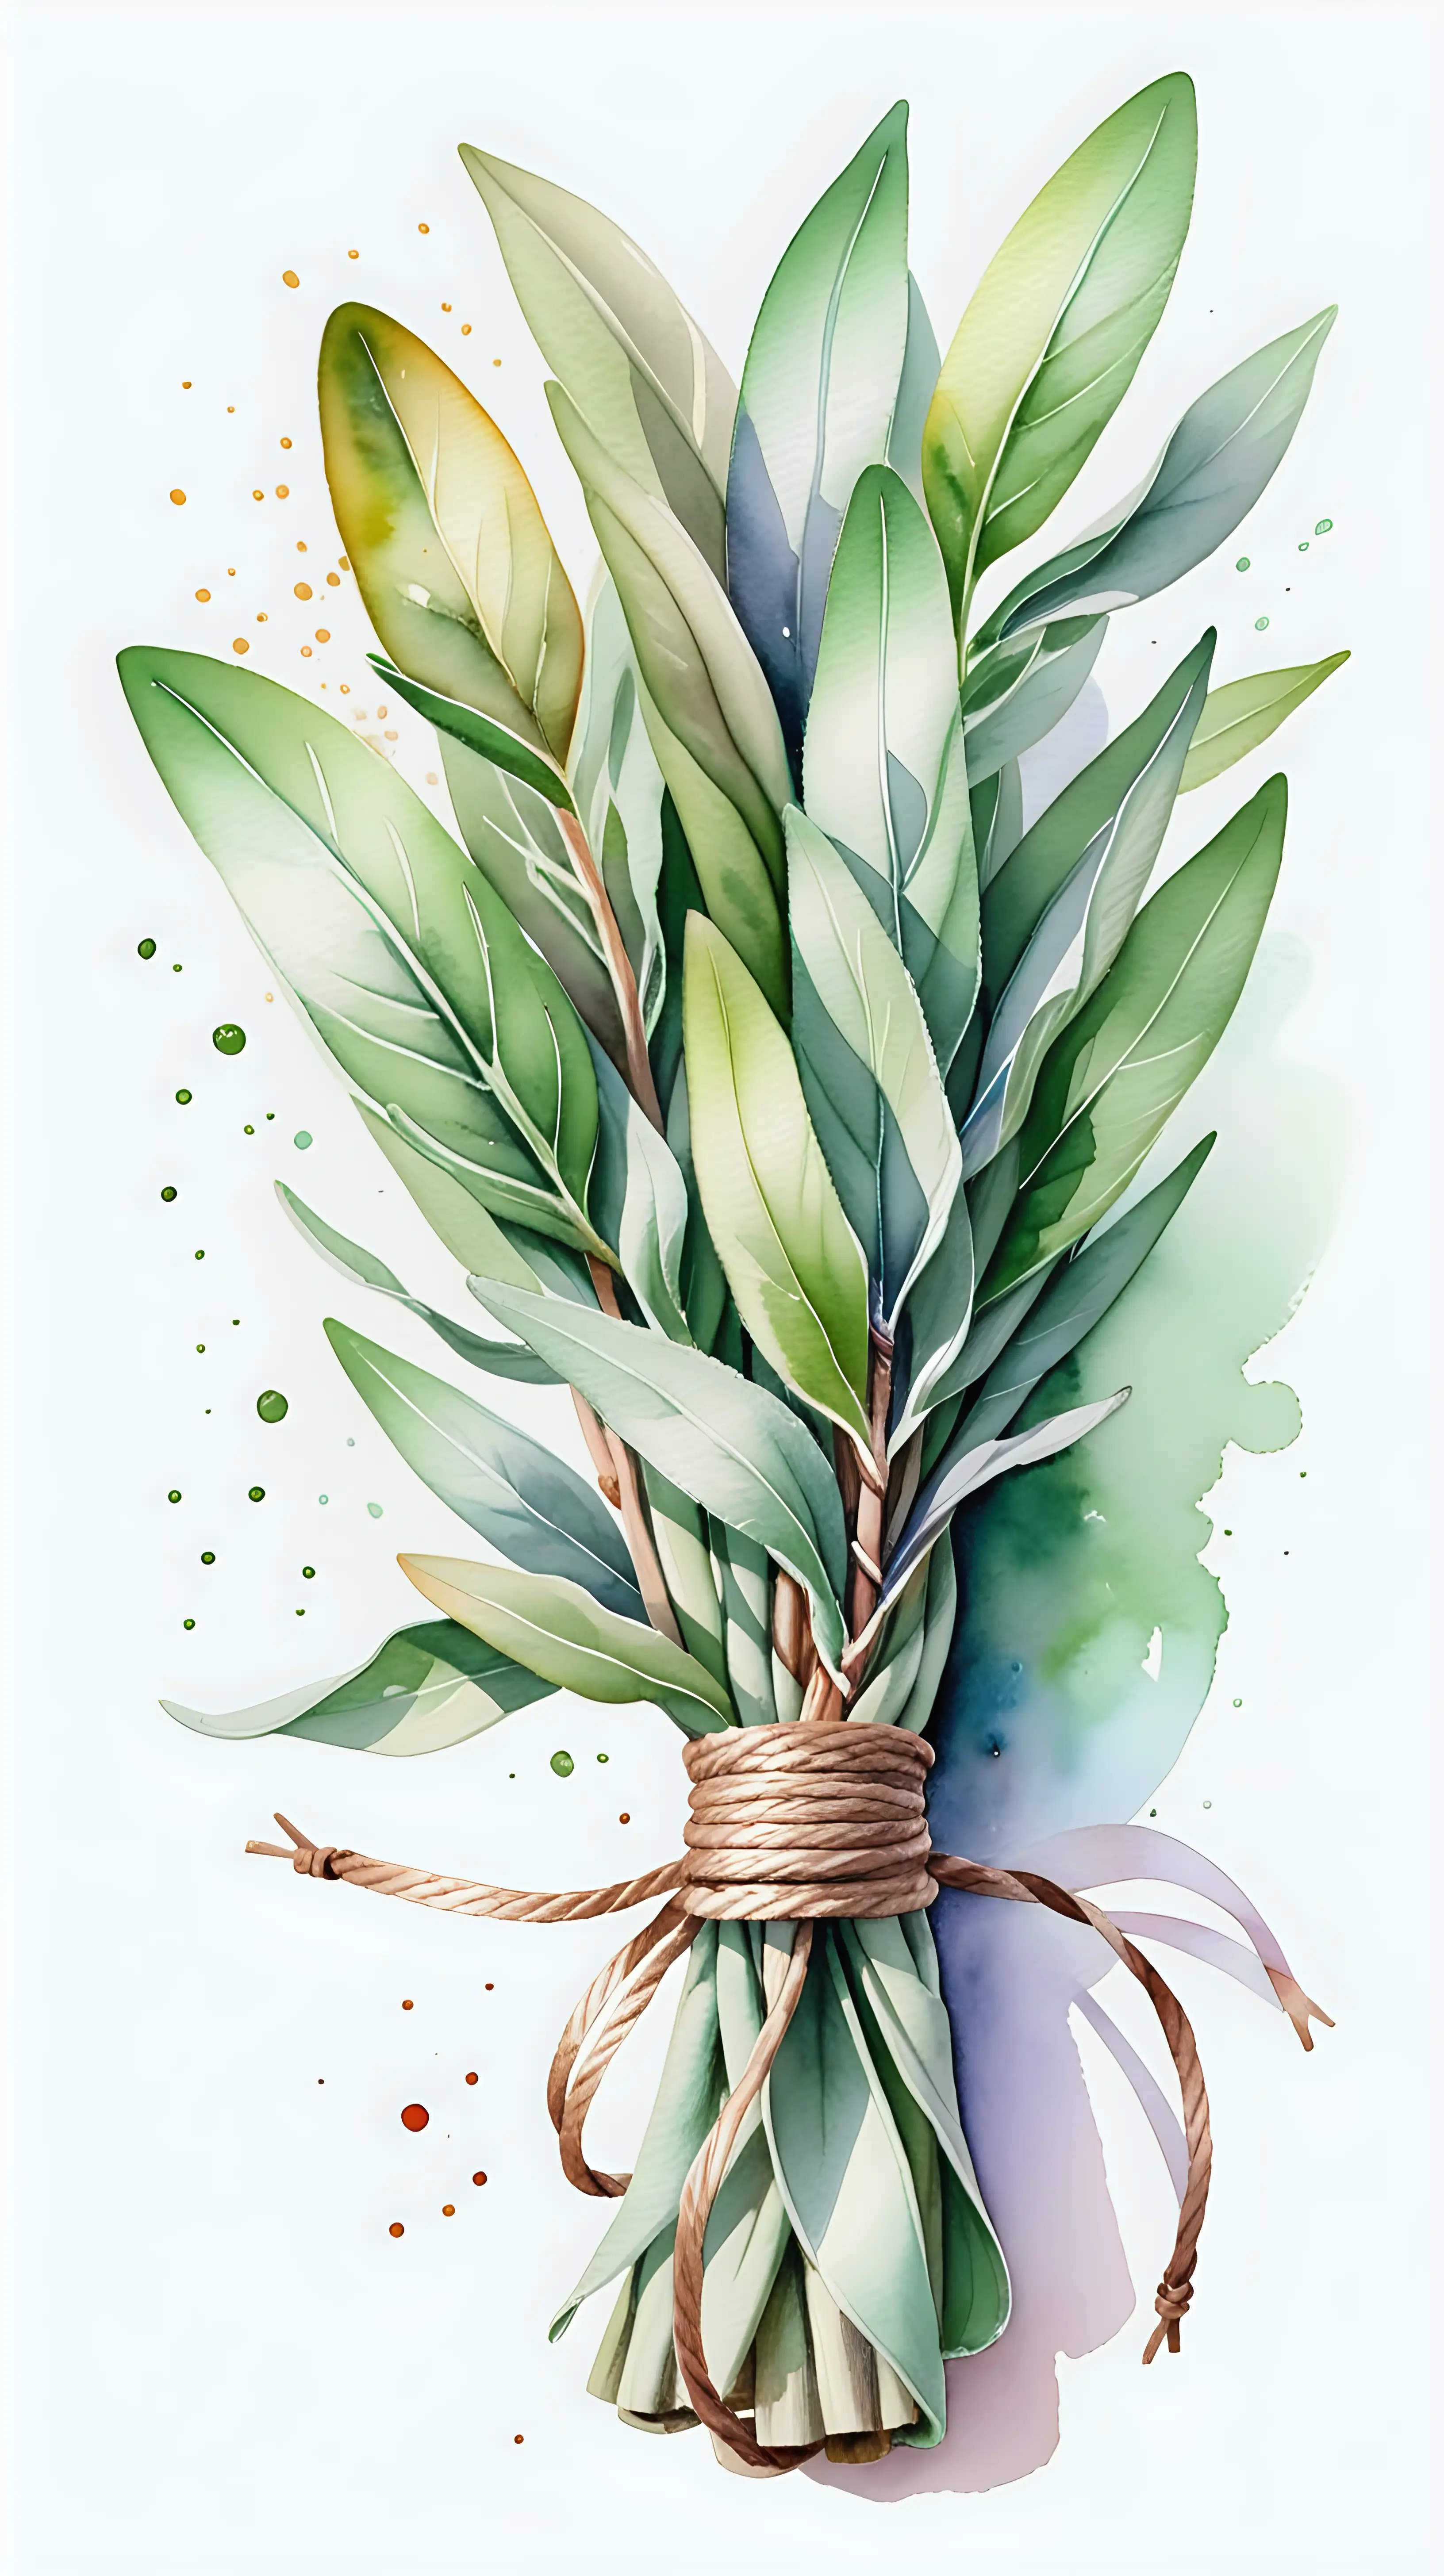 Watercolor Painting of Tied Up Bundle of Sage on White Background